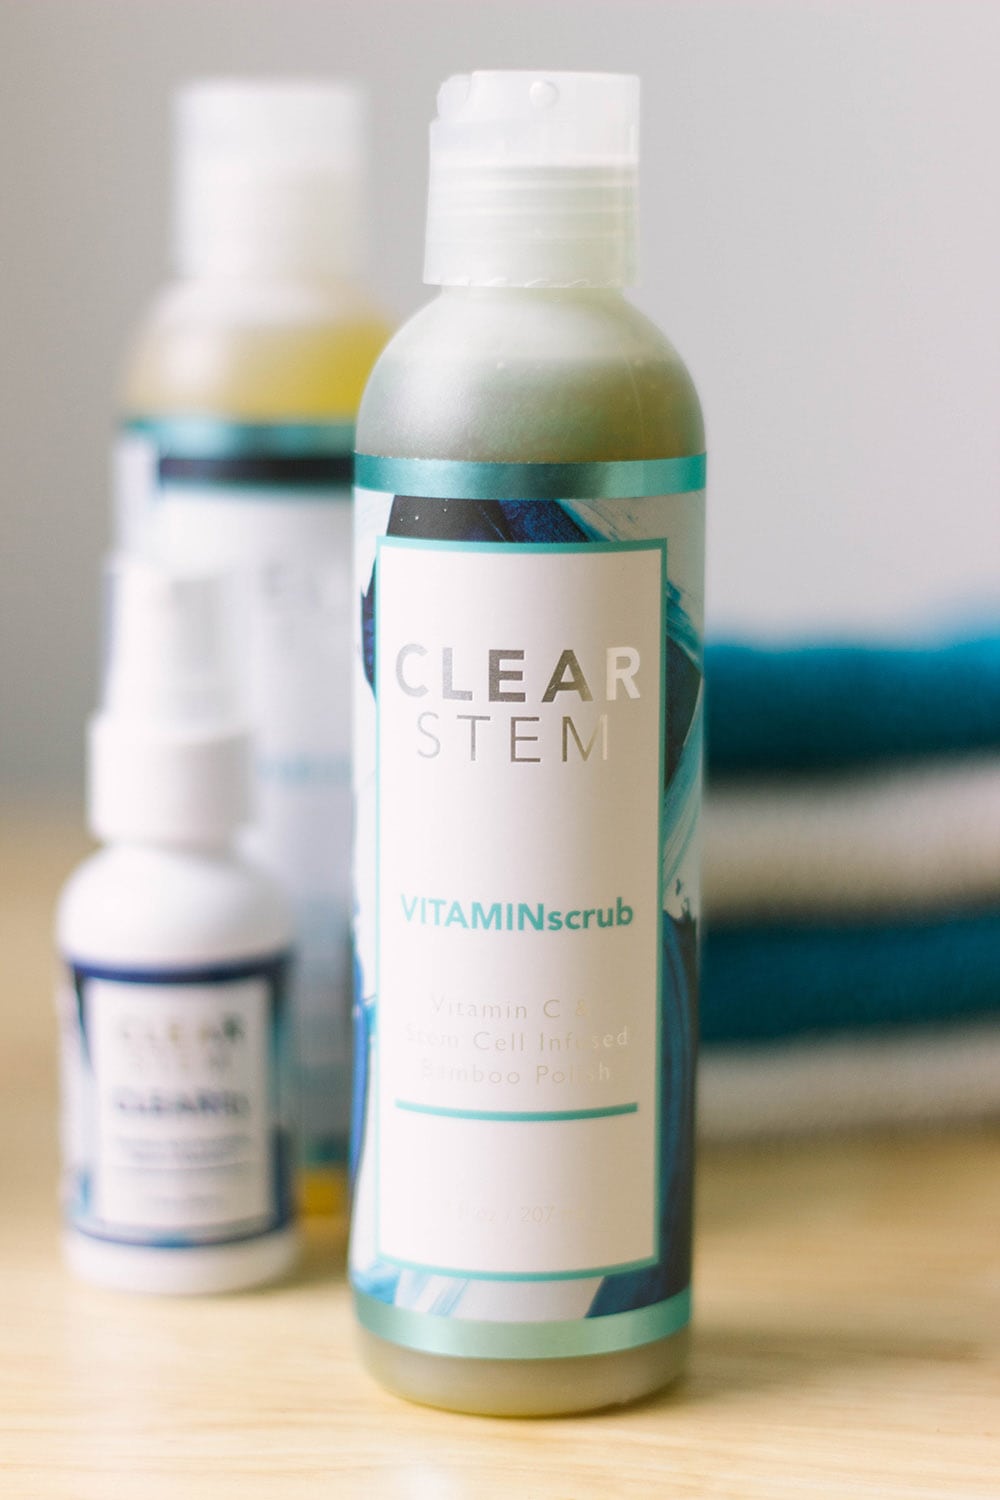 Clearstem skin care products.